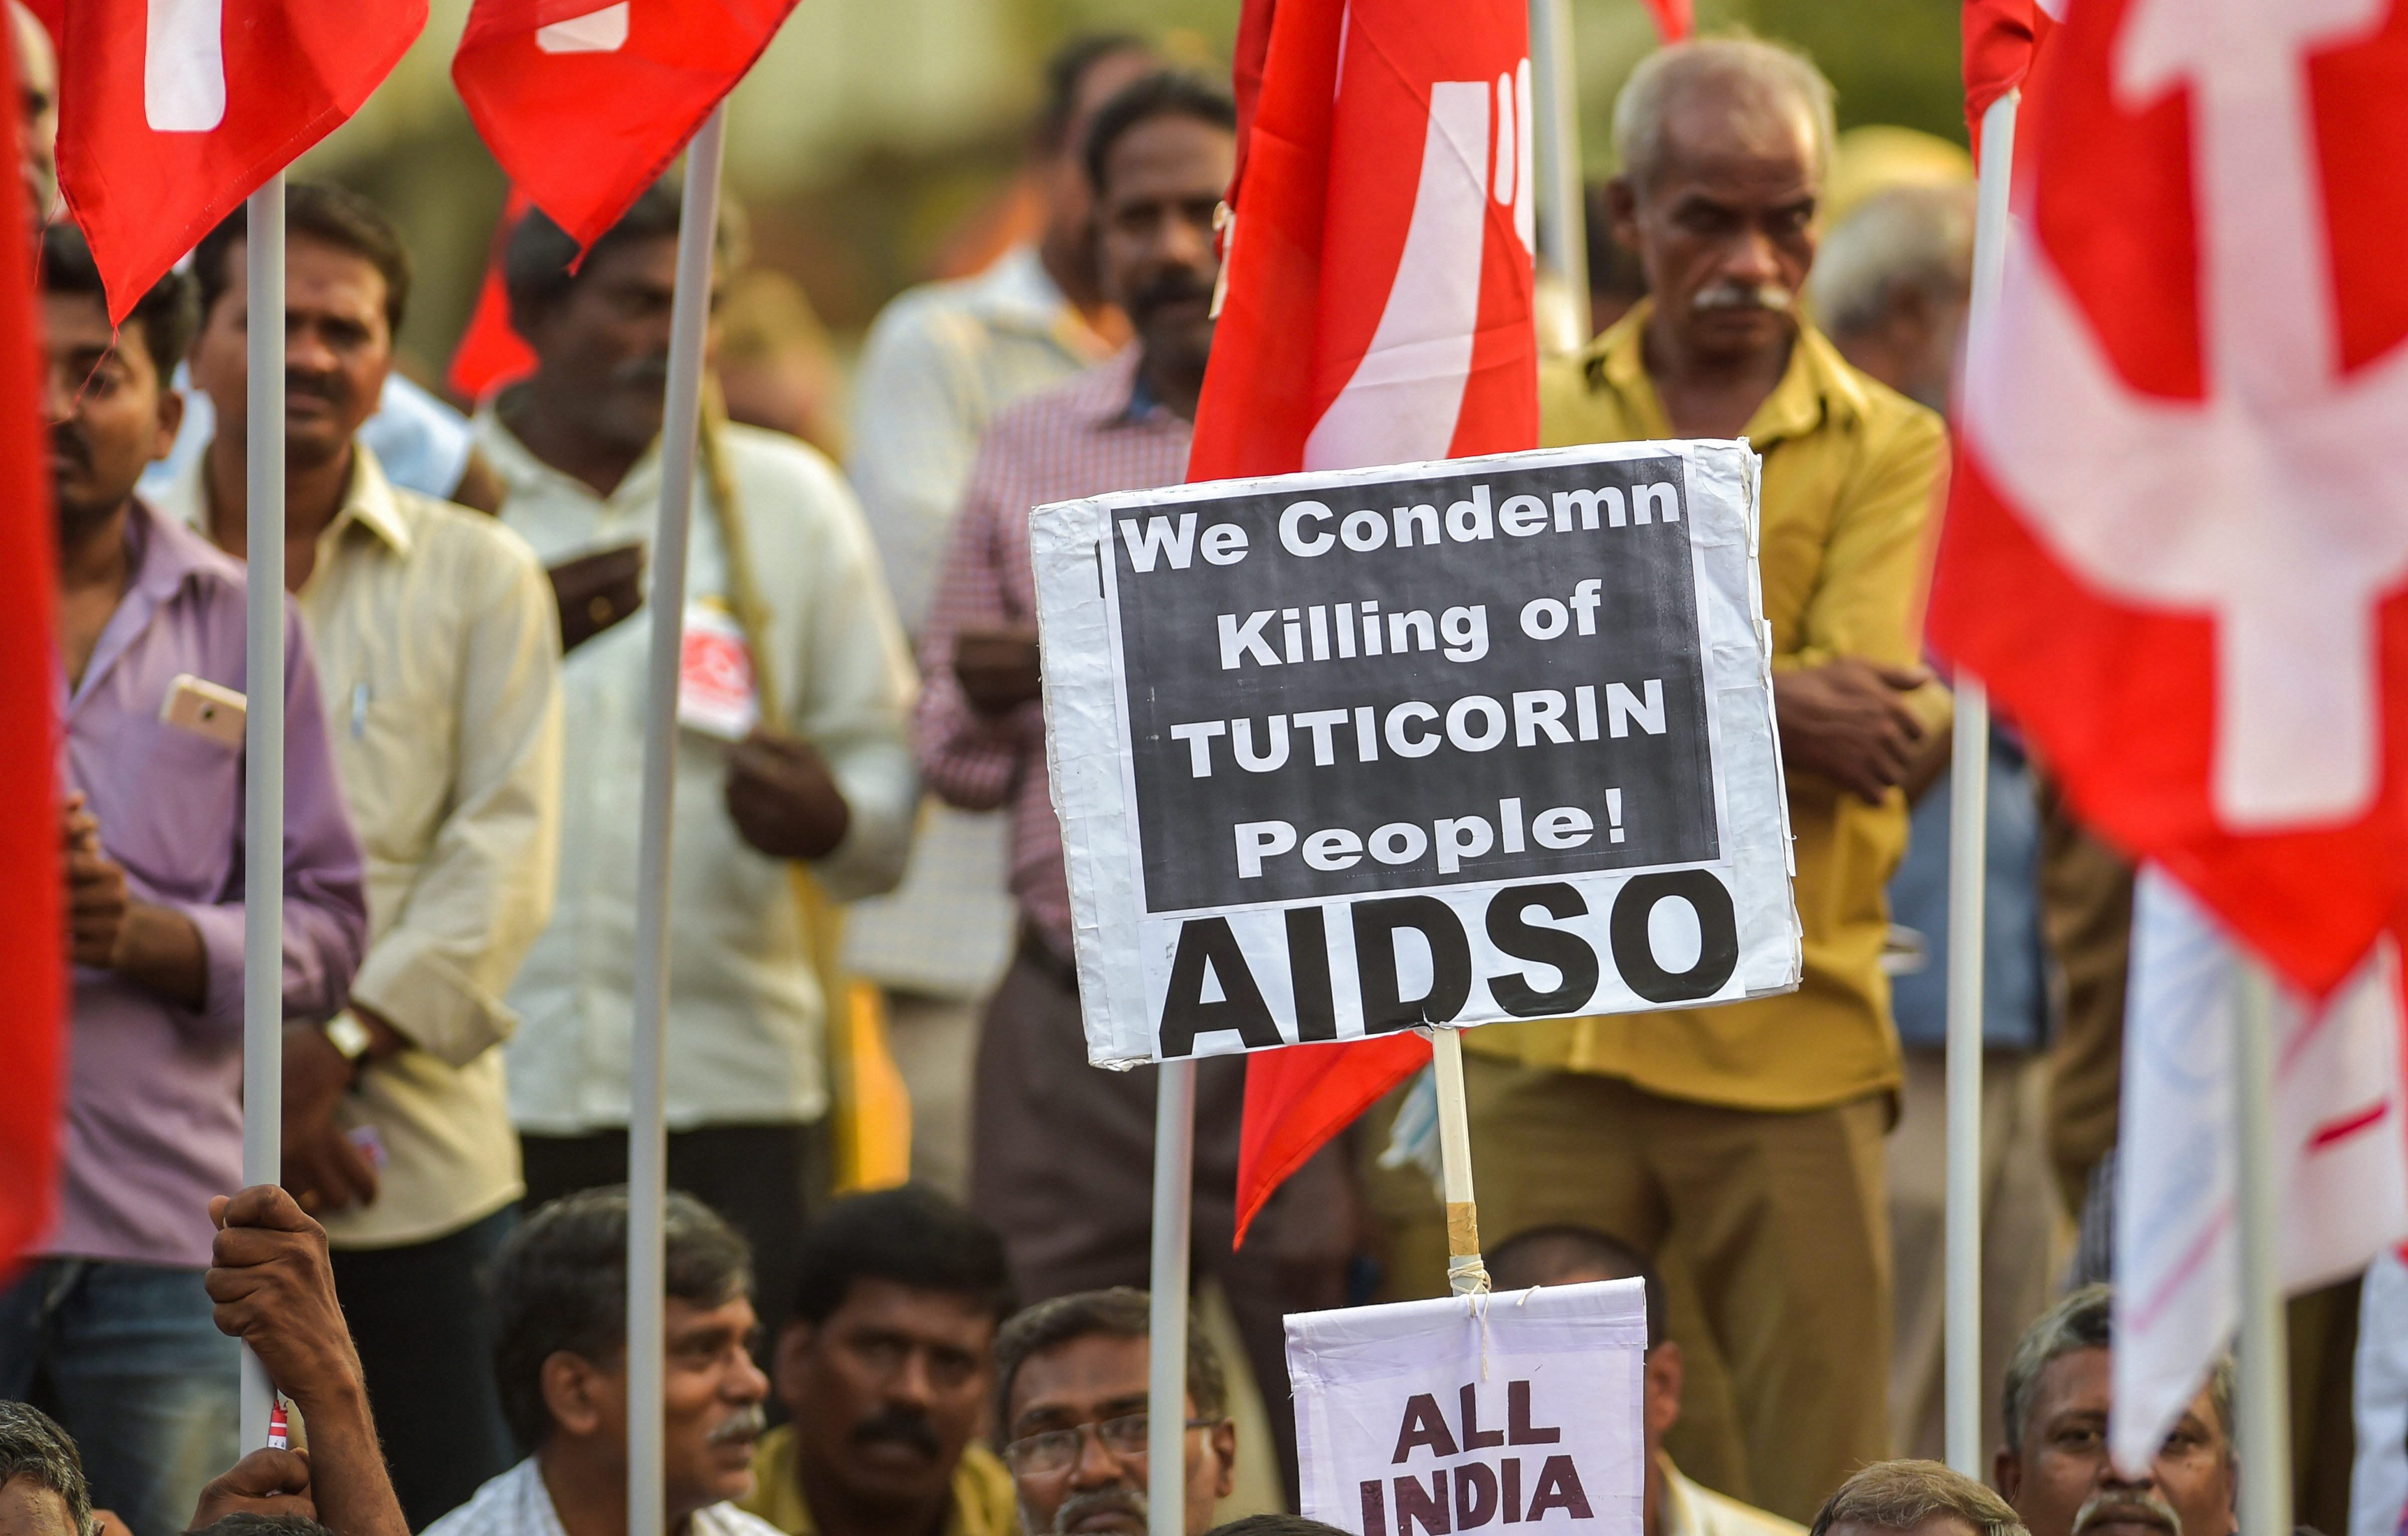 Activists from Trade Union of Communist Party of India during a protest against the Thoothukudi police firing, which claimed 13 lives,in Chennai, on Wednesday. PTI